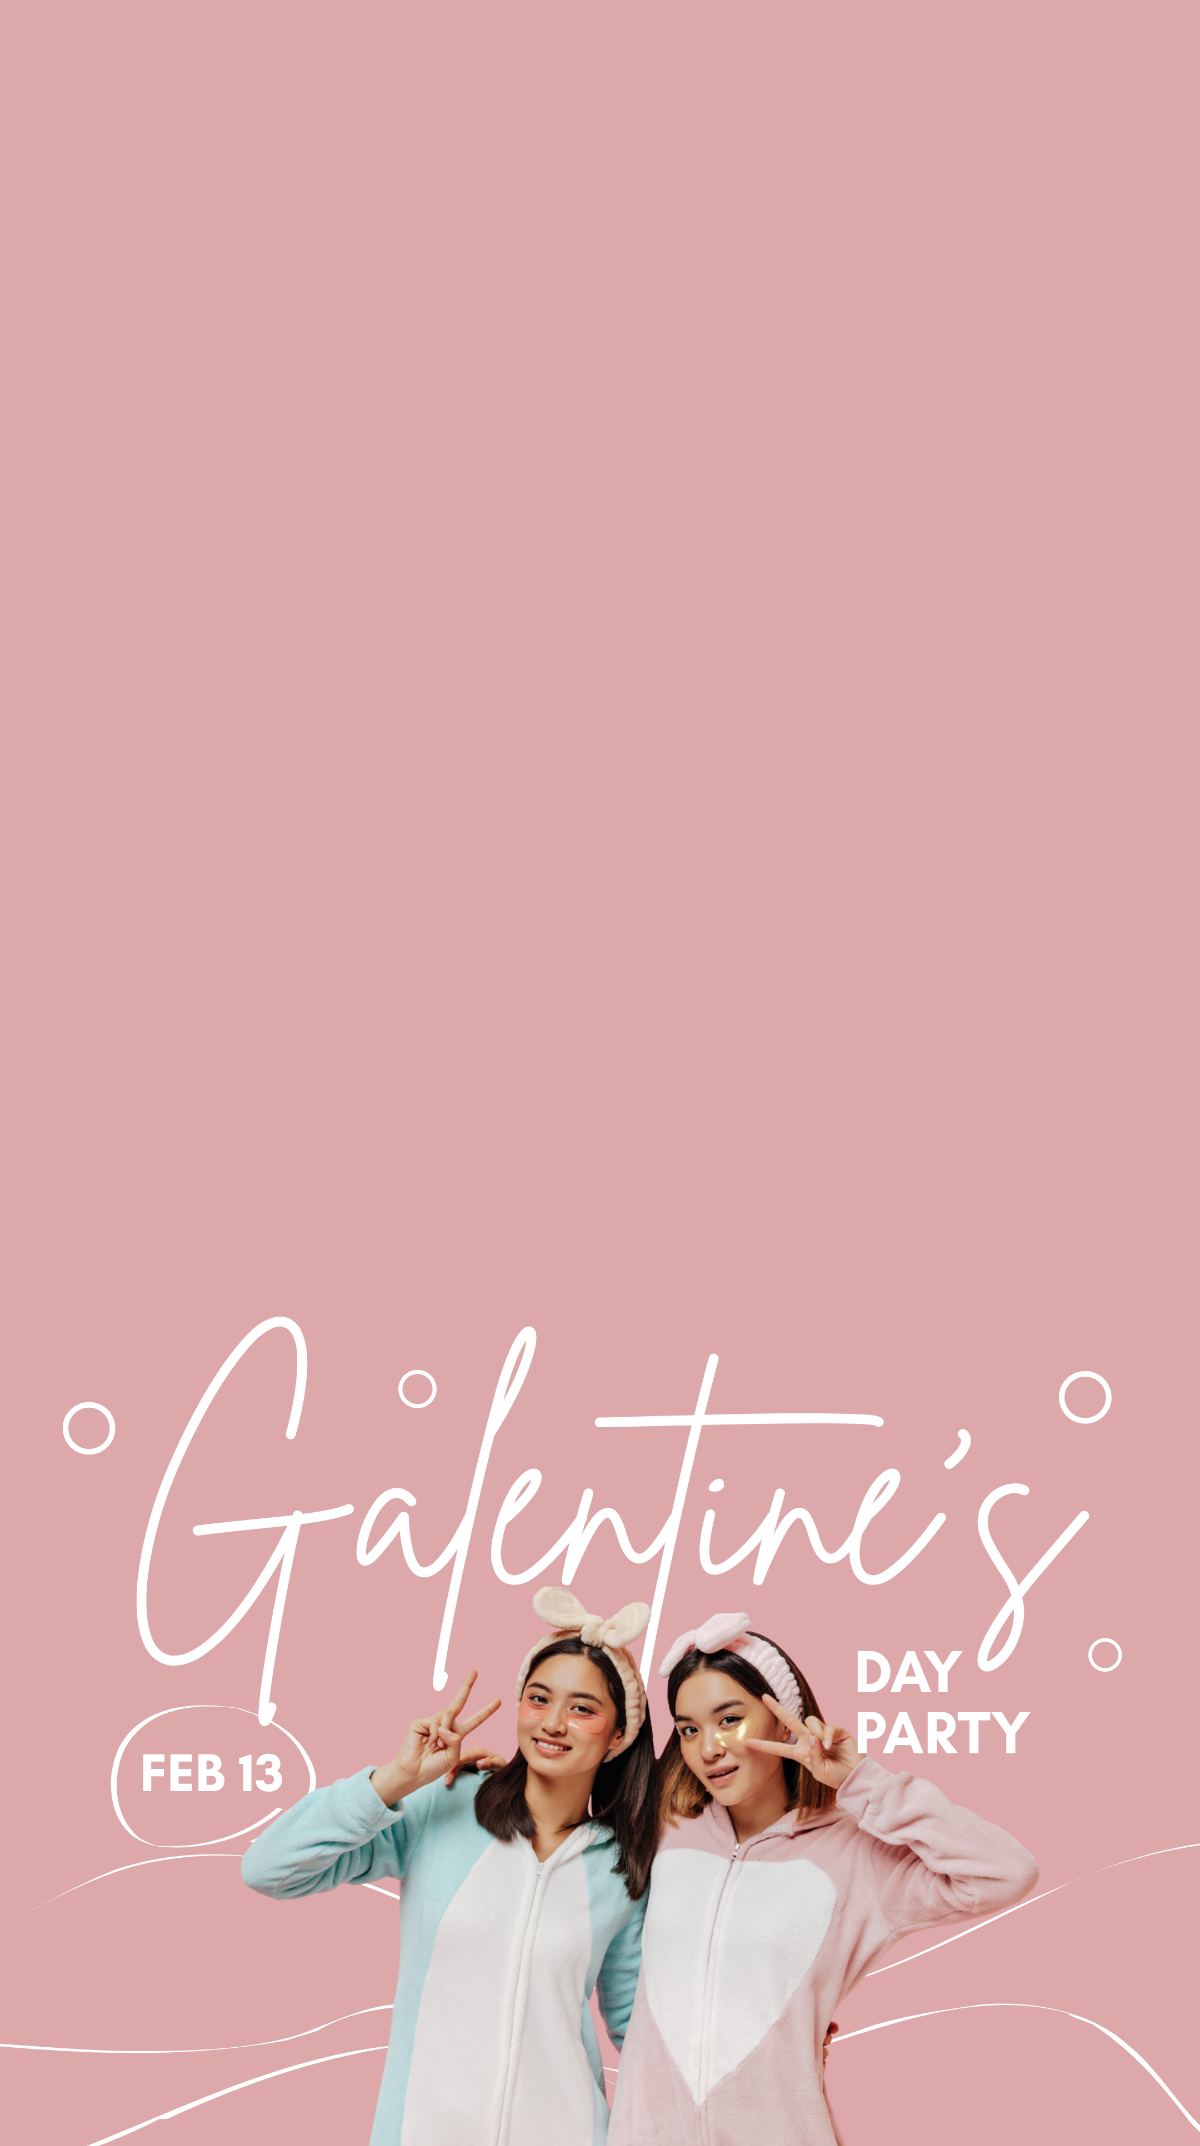 Galentines Day Party Snapchat Geofilter Template